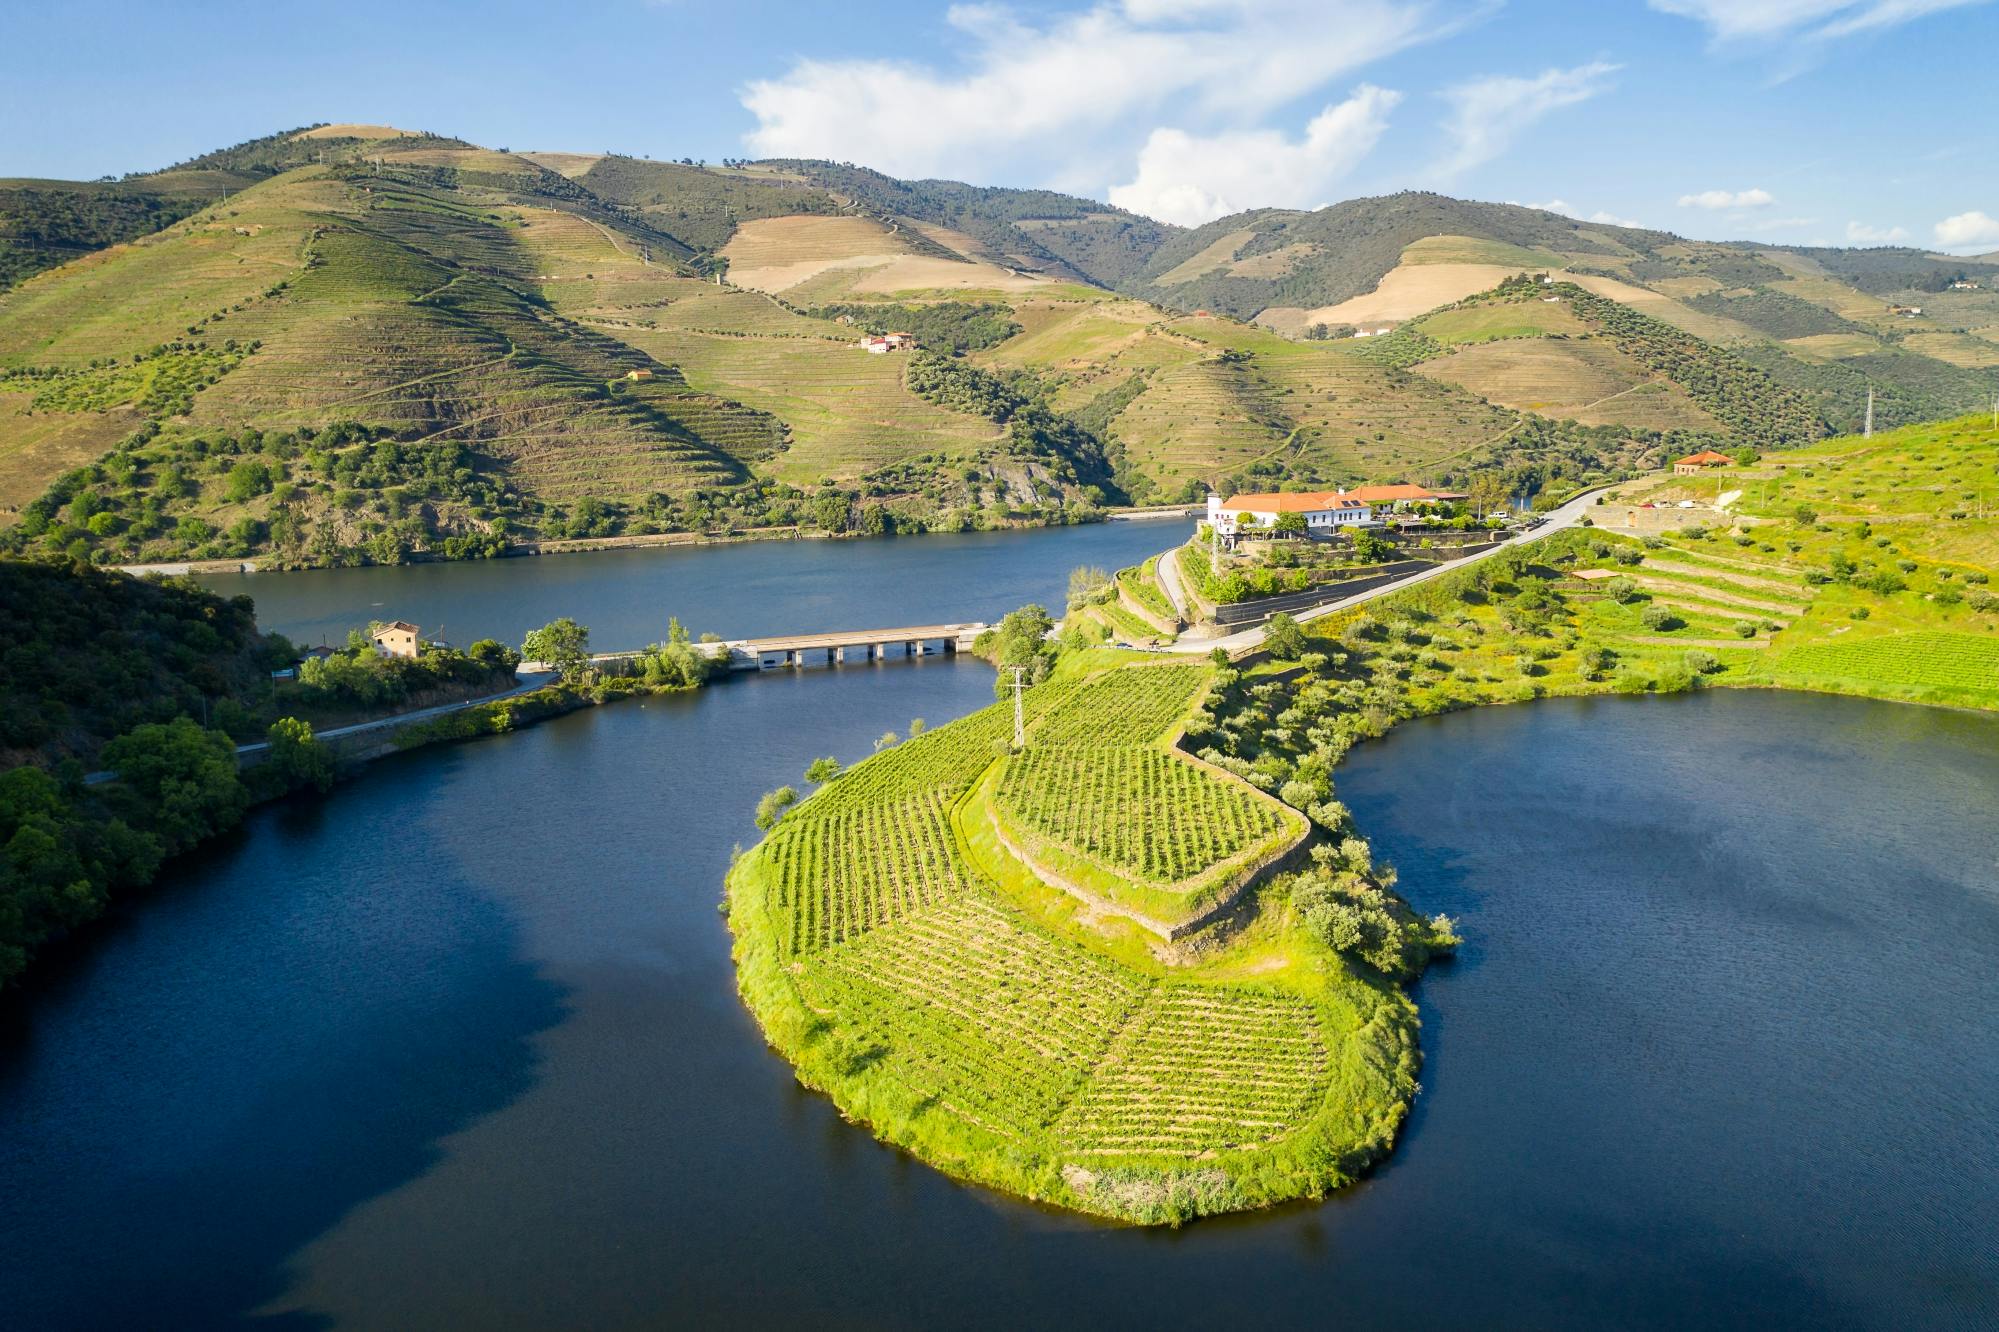 Private tour to the Douro Valley from Porto